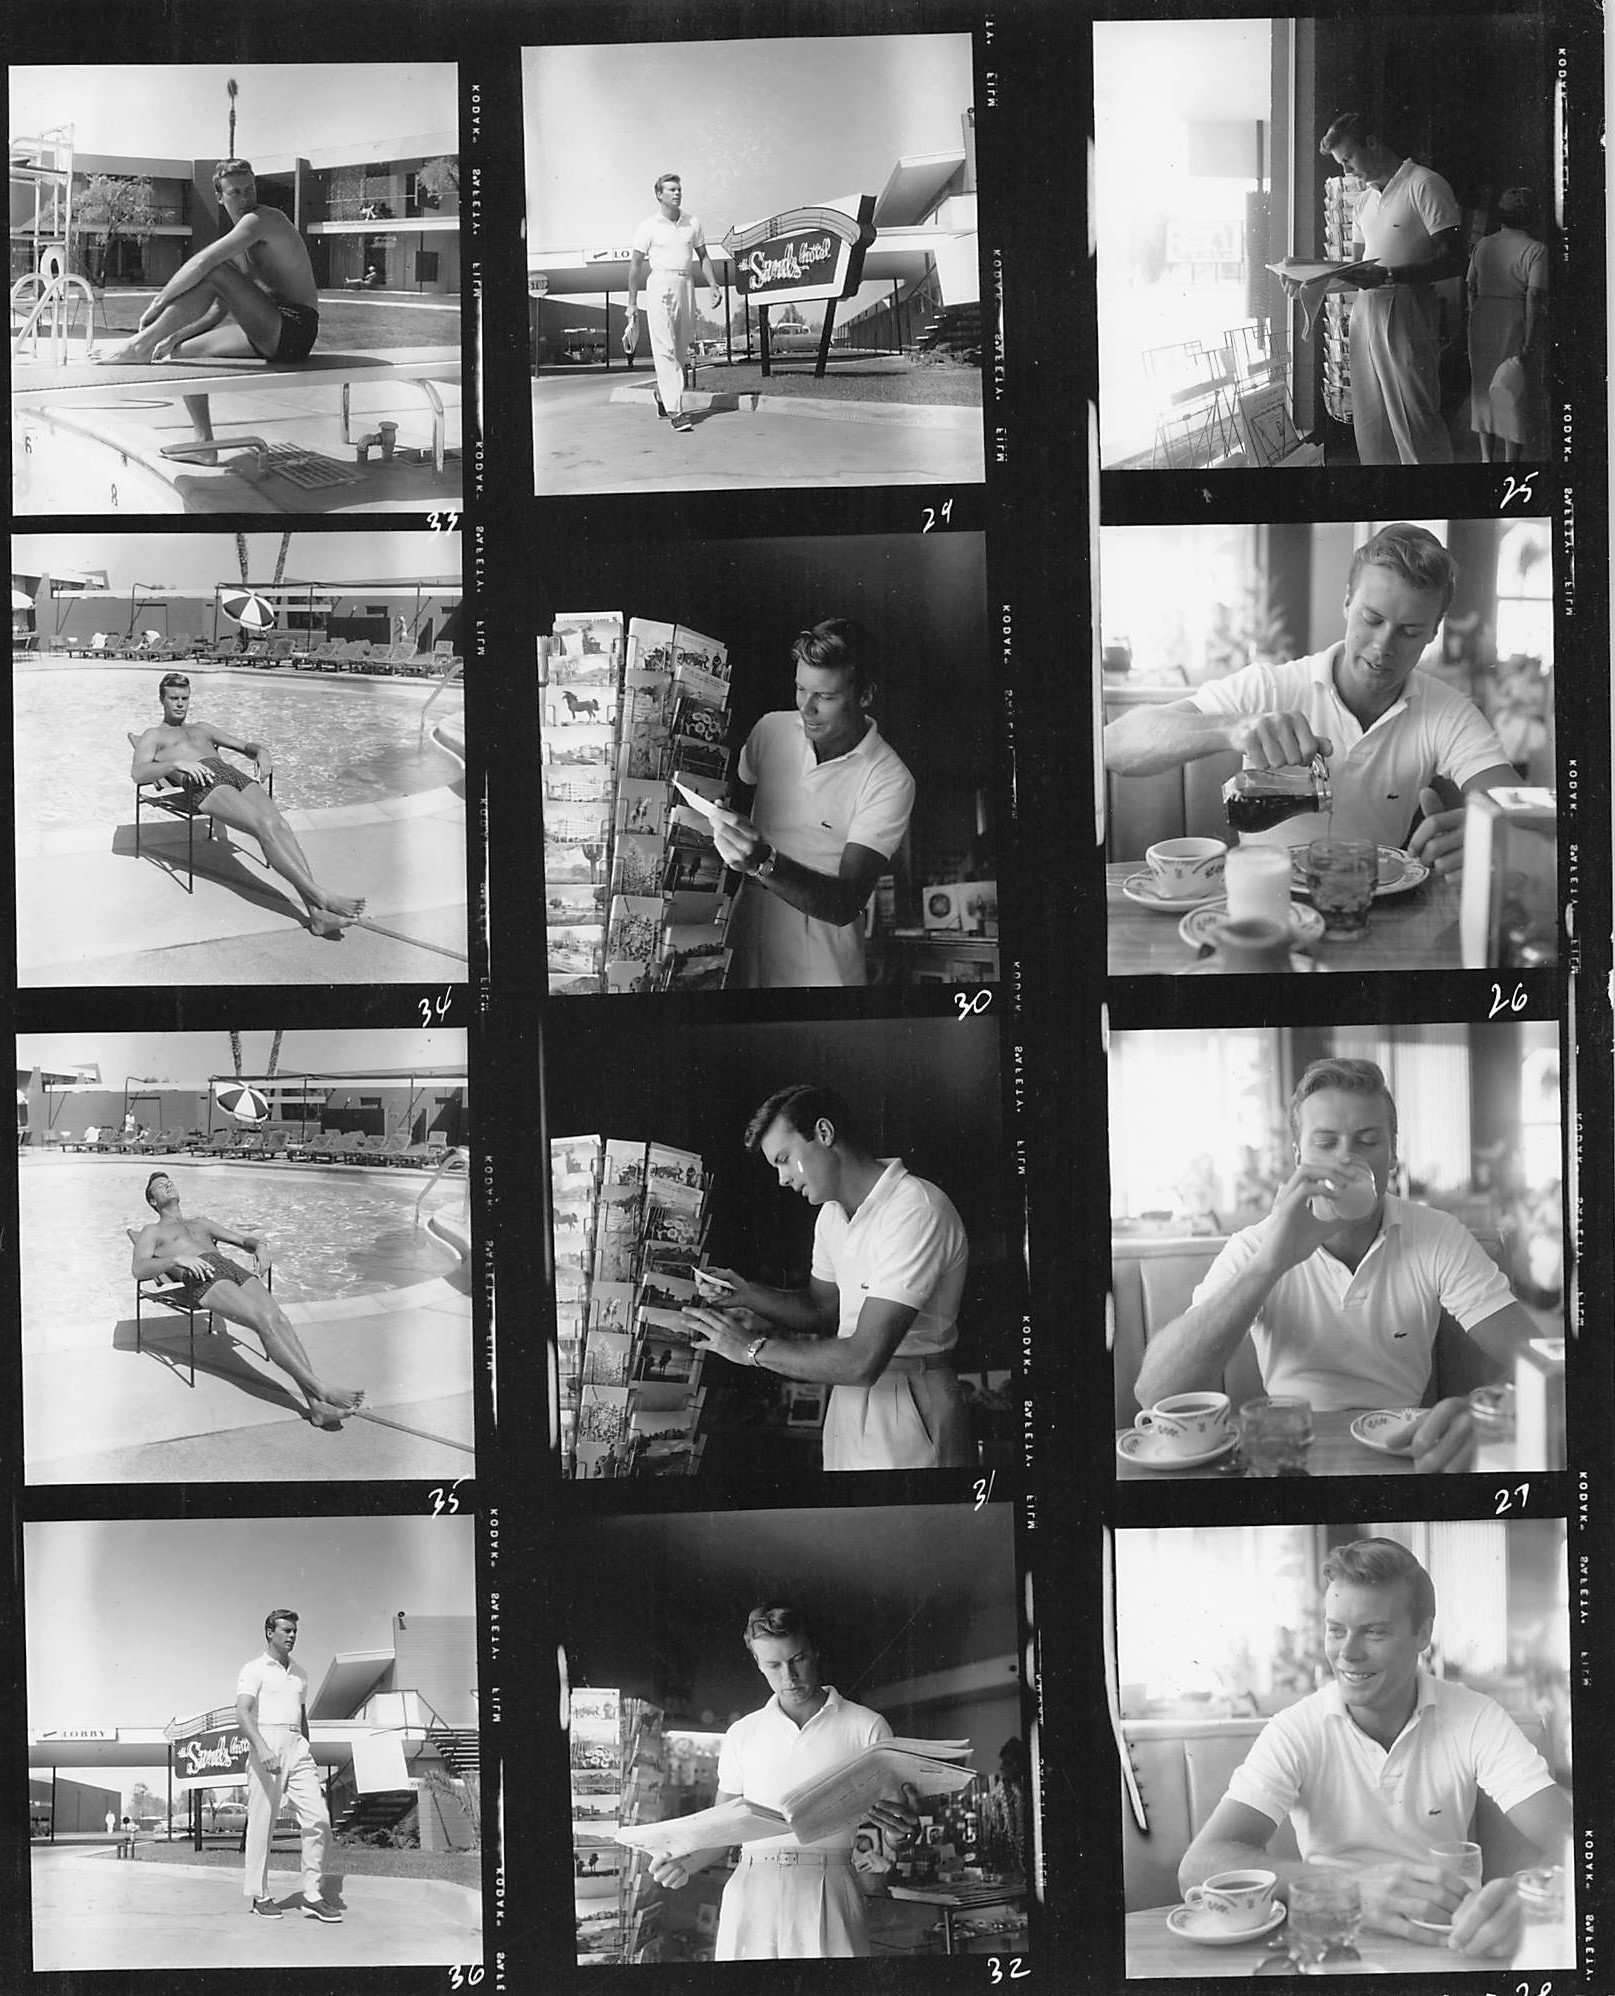  Spring 1955. Bob visited Las Vegas. These contact sheets probably were for a projected photo story about his trip, but they were never used for that or printed elsewhere as far as is known. Photos by Larry Barberi, Globe Photos, New York City. 